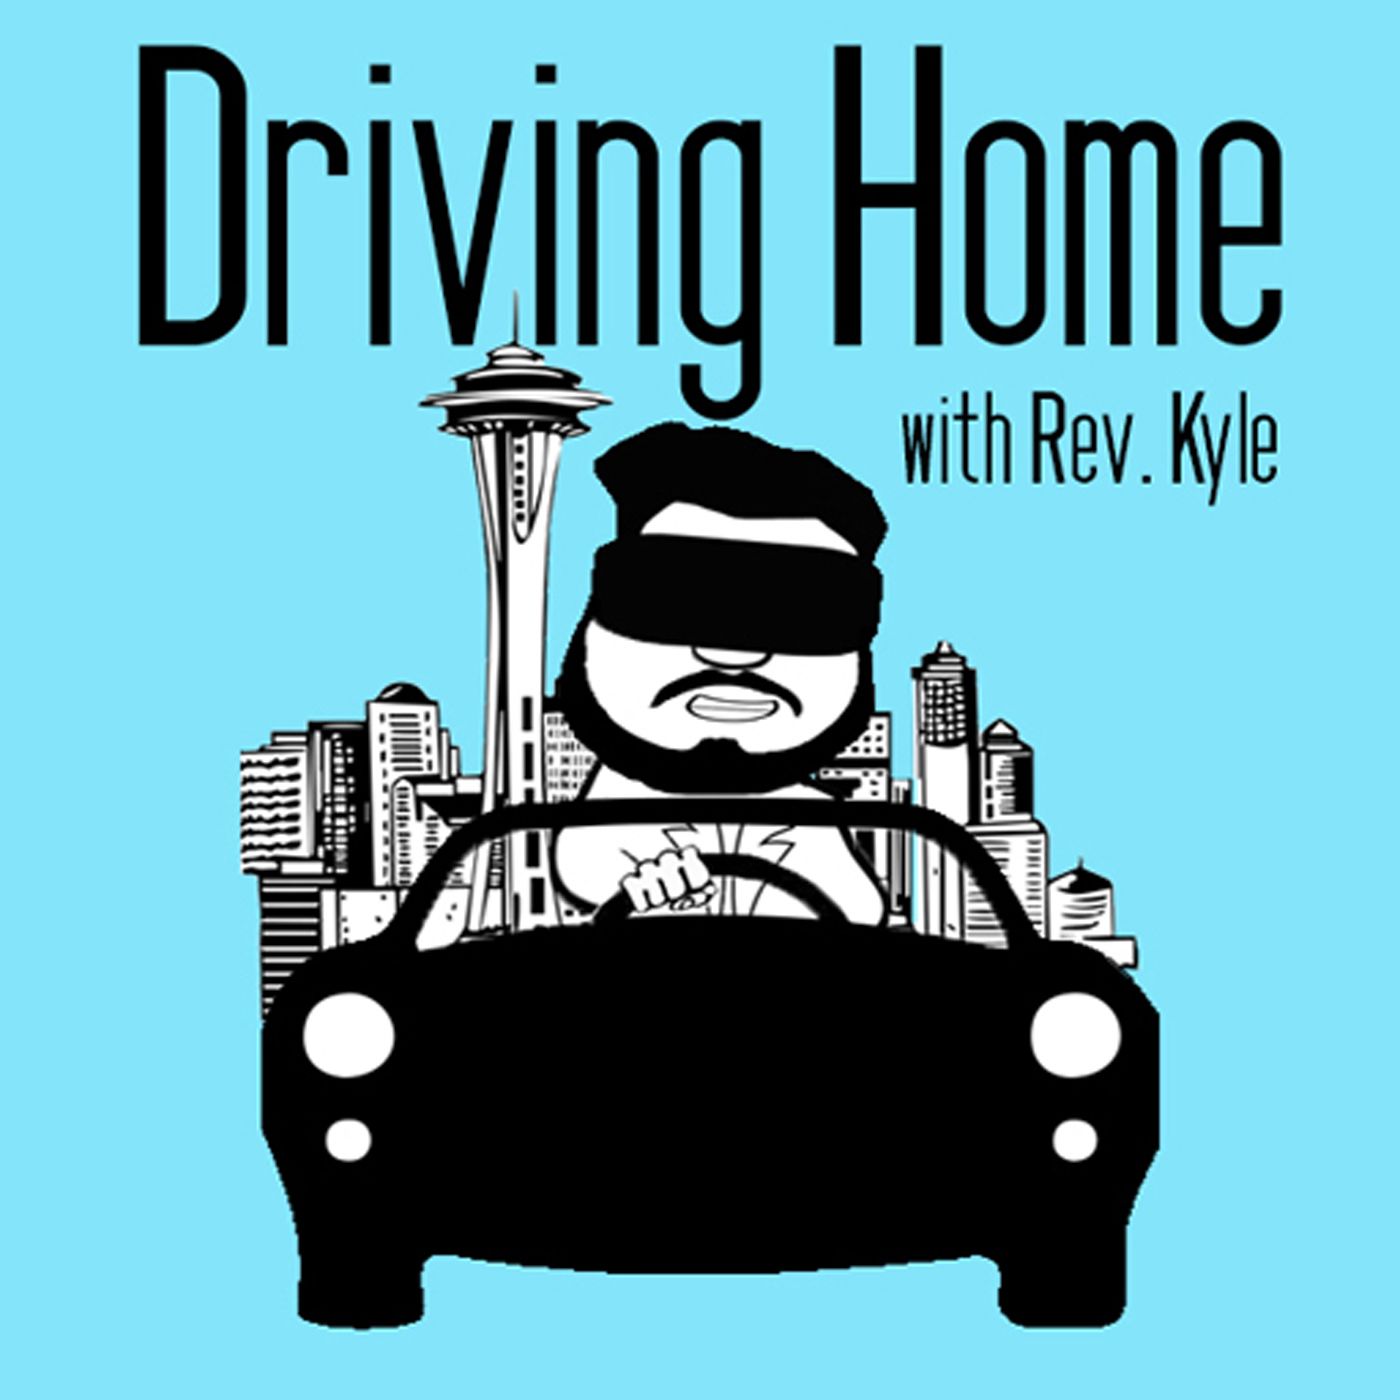 Driving Home with Rev. Kyle